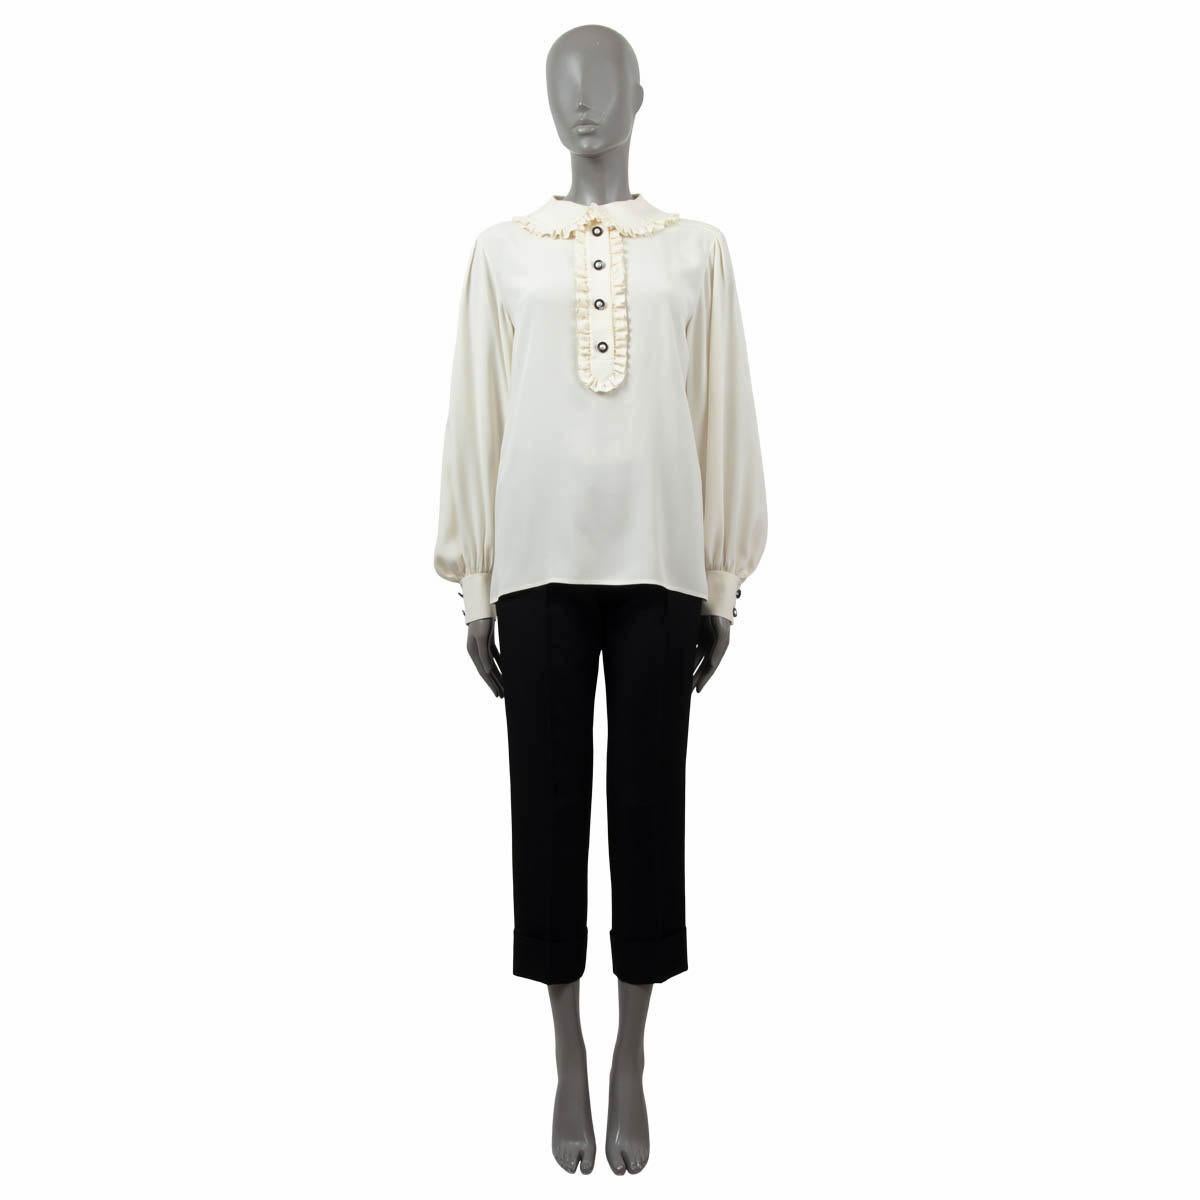 100% authentic Chanel ruffled peter-pan collar blouse in ivory silk (100%). The design features faux peral embellished buttons at front and cuffs. Has been worn and is in excellent condition. 

Measurements
Tag Size	38
Size	S
Shoulder Width	45cm